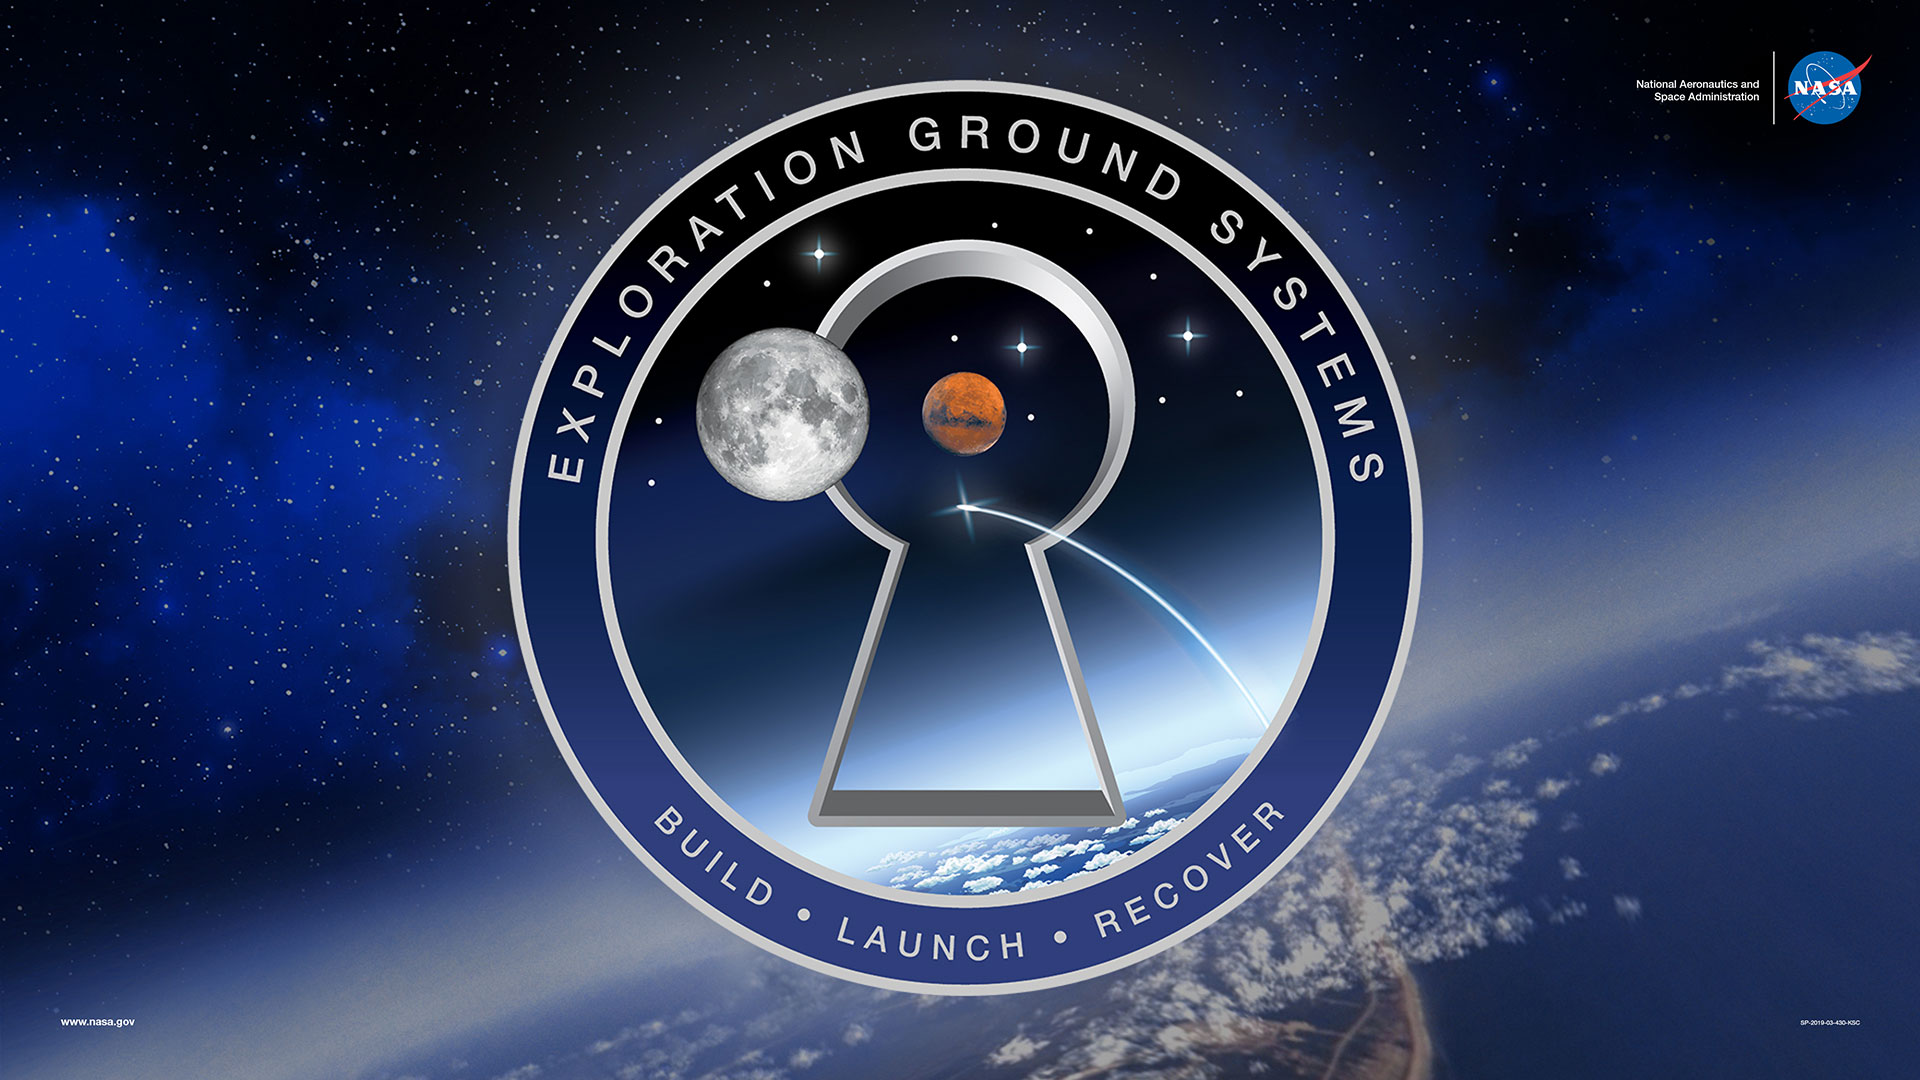 A graphic of NASA's Exploration Ground System's logo.